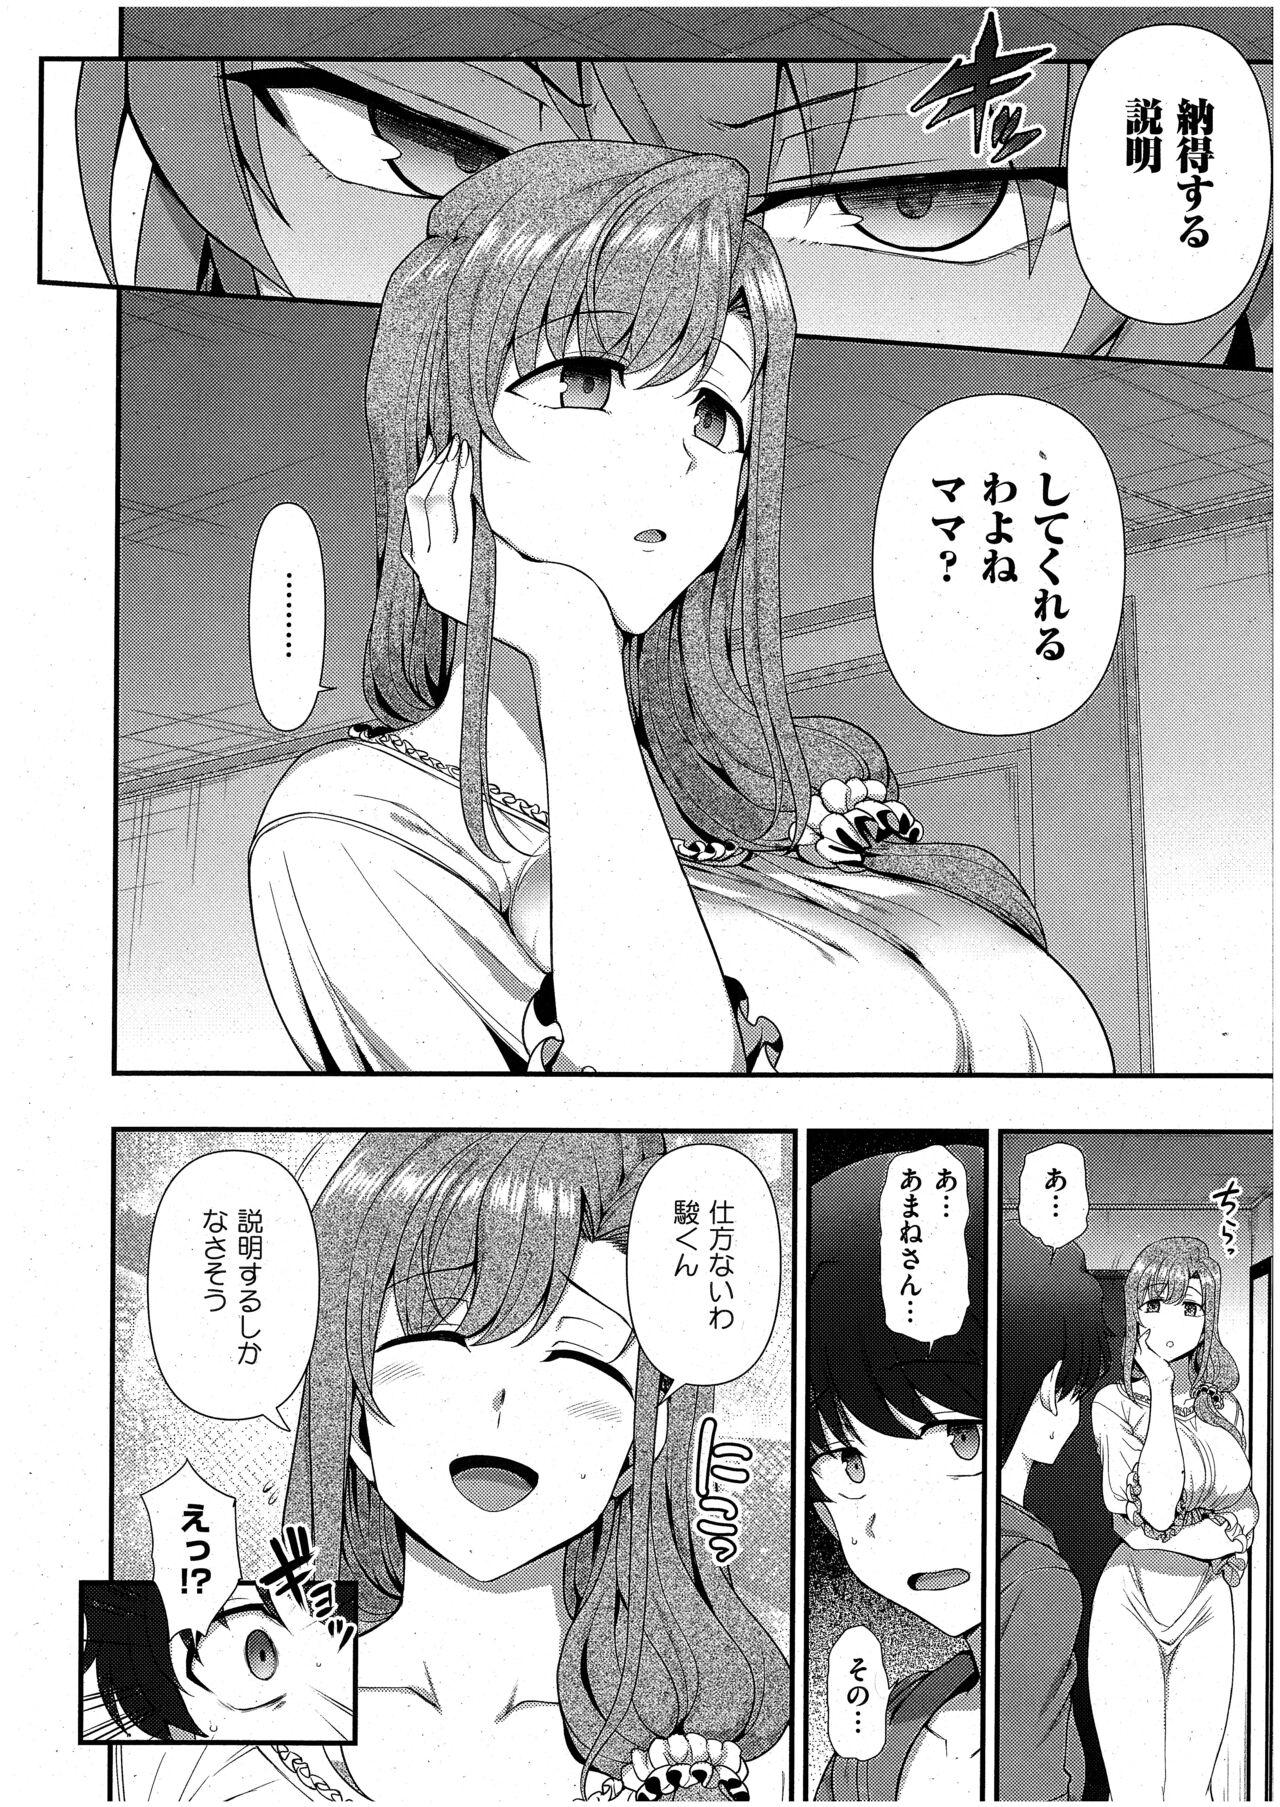 Tgirl FamiCon - Family Control Ch. 3 Stepbrother - Page 4